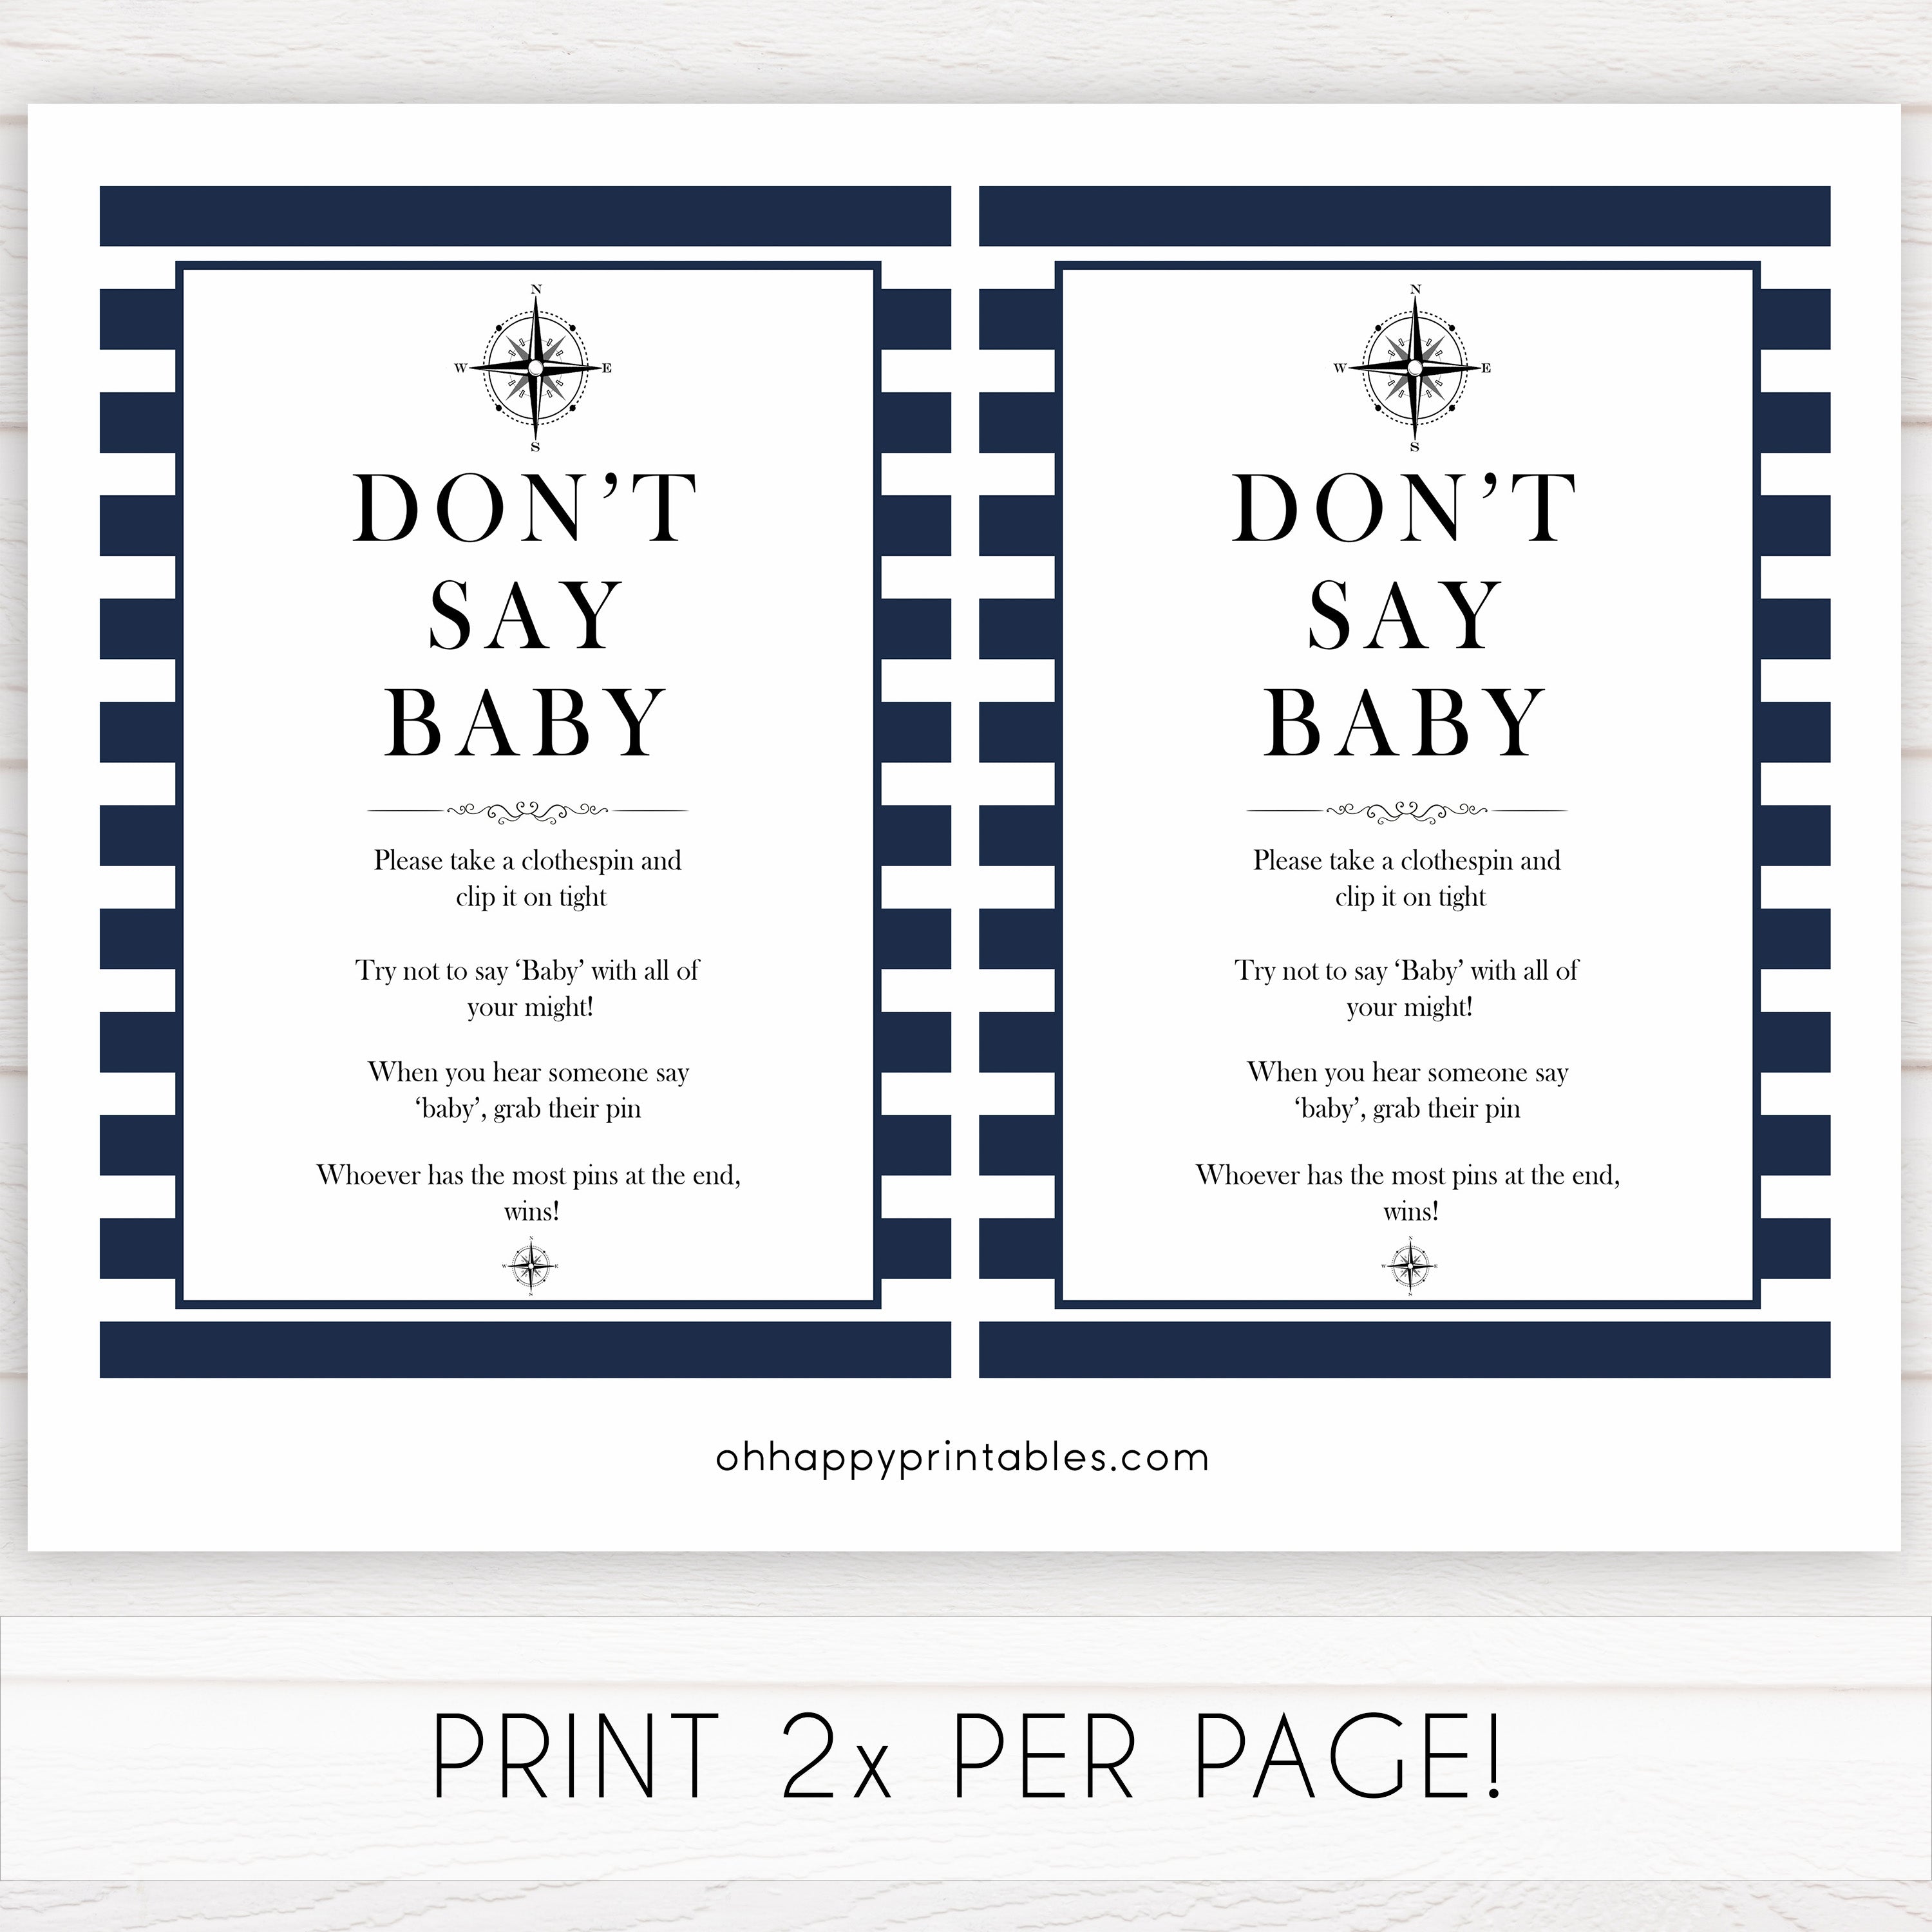 Nautical baby shower games, dont say baby baby shower games, printable baby shower games, baby shower games, fun baby games, ahoy its a boy, popular baby shower games, sailor baby games, boat baby games